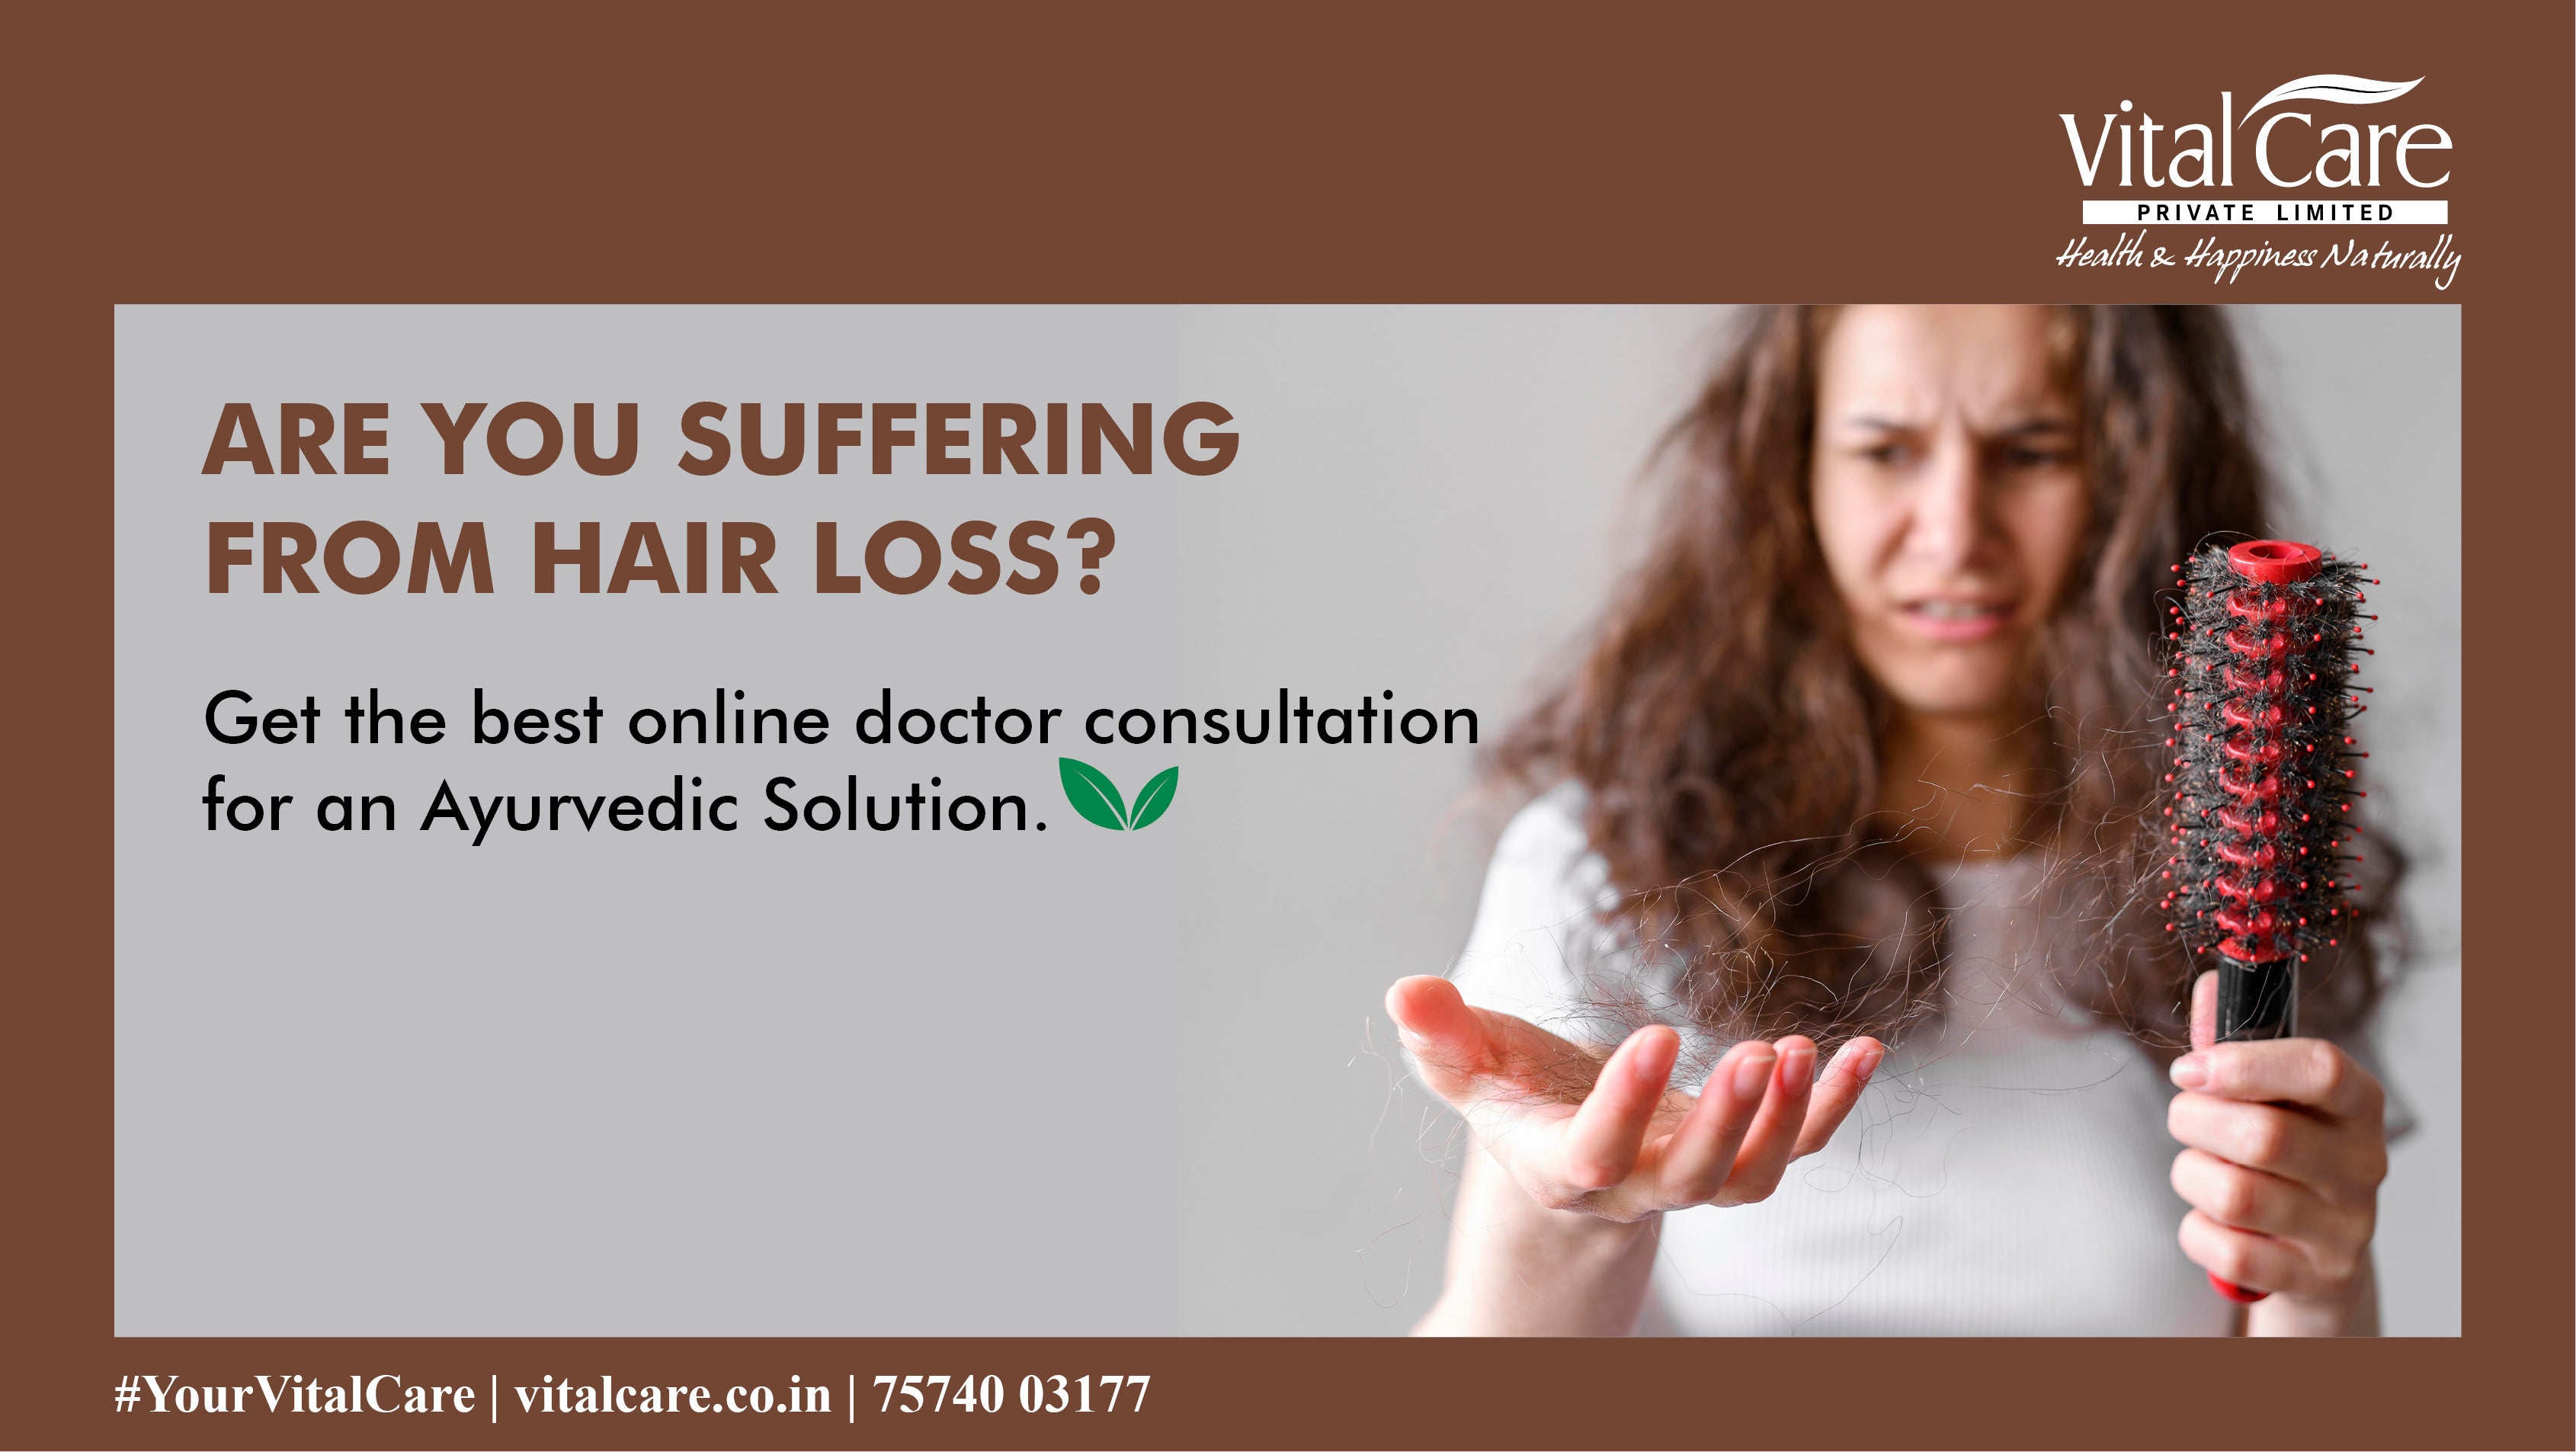 Losing hair? Get the best online doctor consultation for an Ayurvedic solution